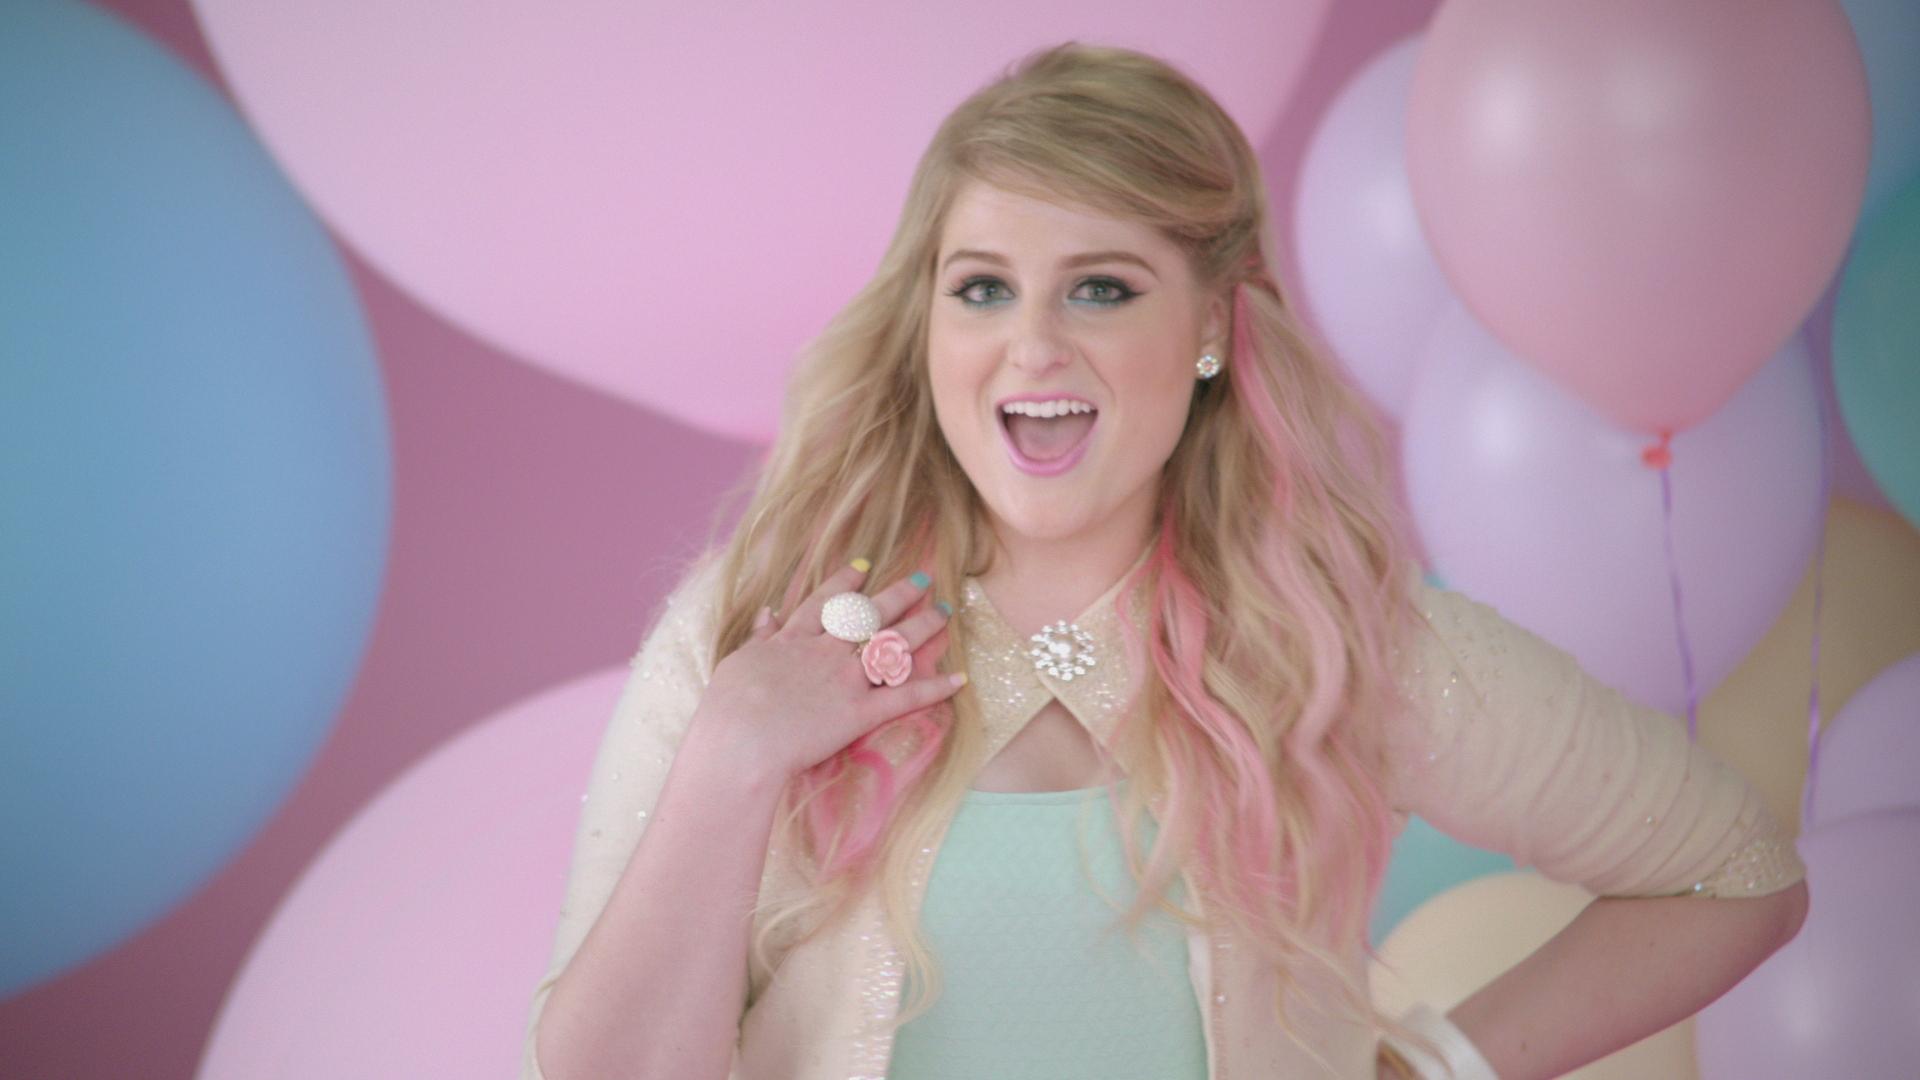 Meghan Trainor - All About That Bass (Clean Video Version)